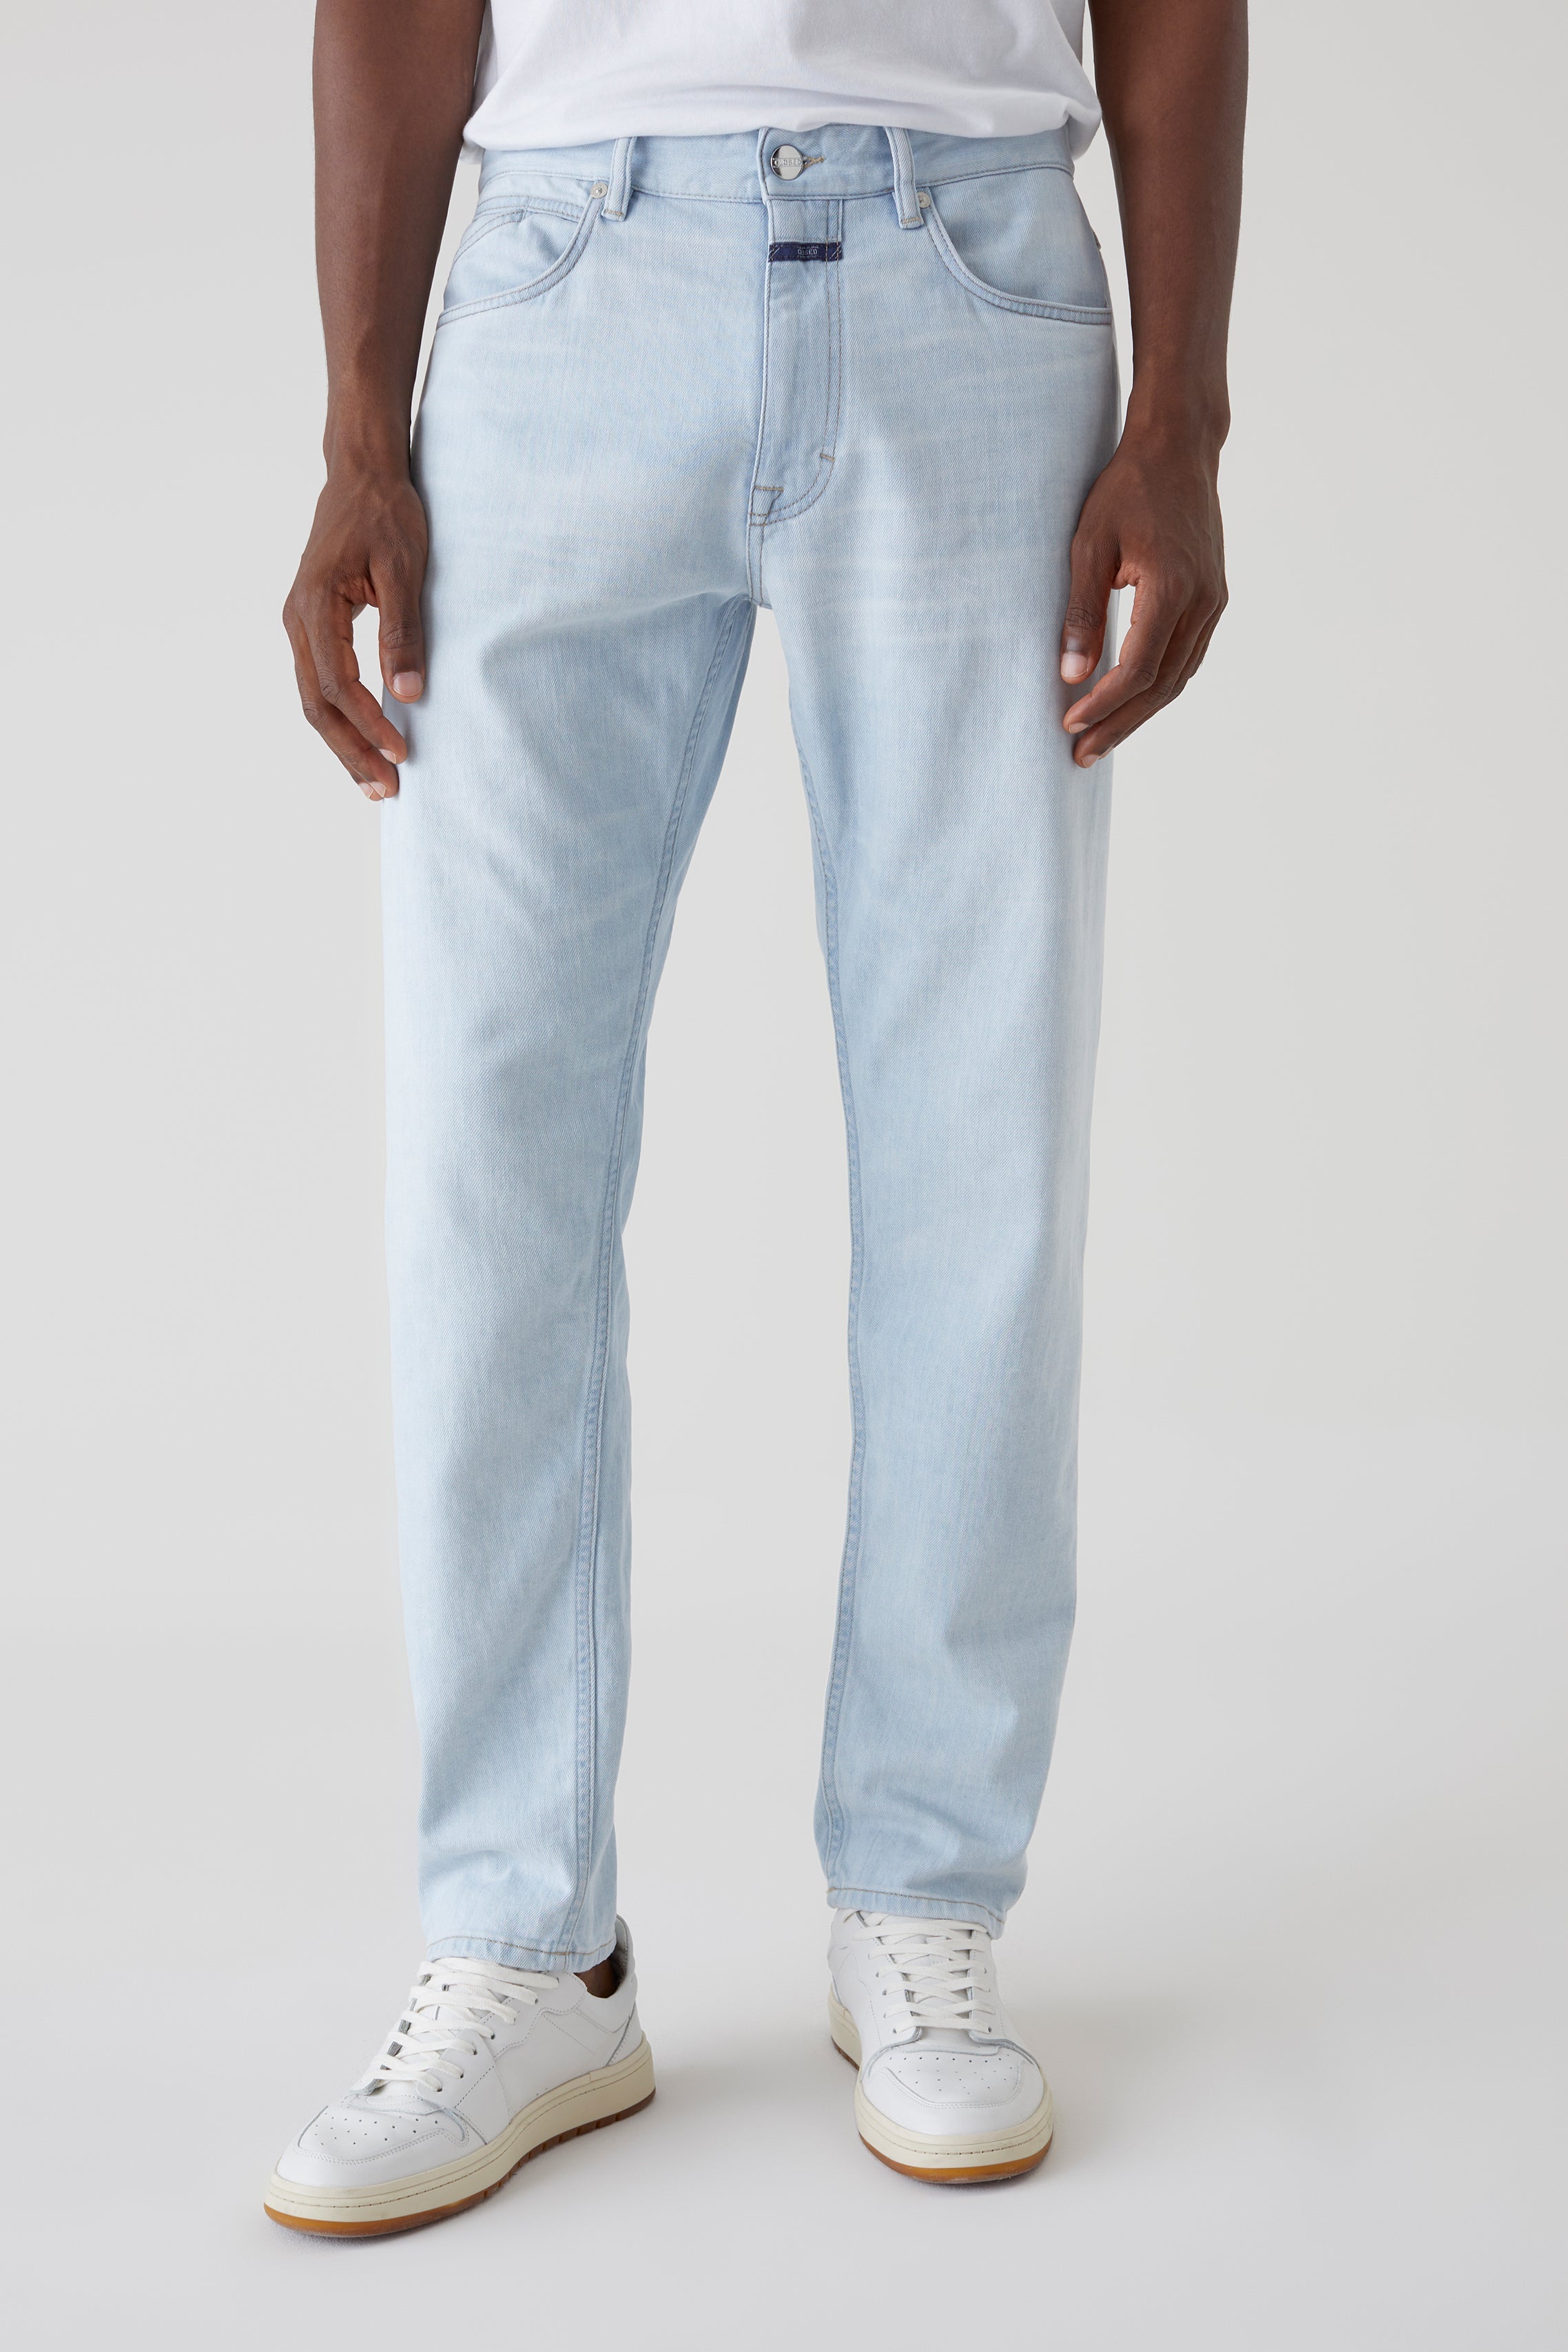 CLOSED-OUTLET-SALE-STYLE-NAME-COOPER-TAPERED-JEANS-Hosen-ARCHIVE-COLLECTION_a0eb5893-a8c3-4a23-a3cb-7624c85b4fa9.jpg